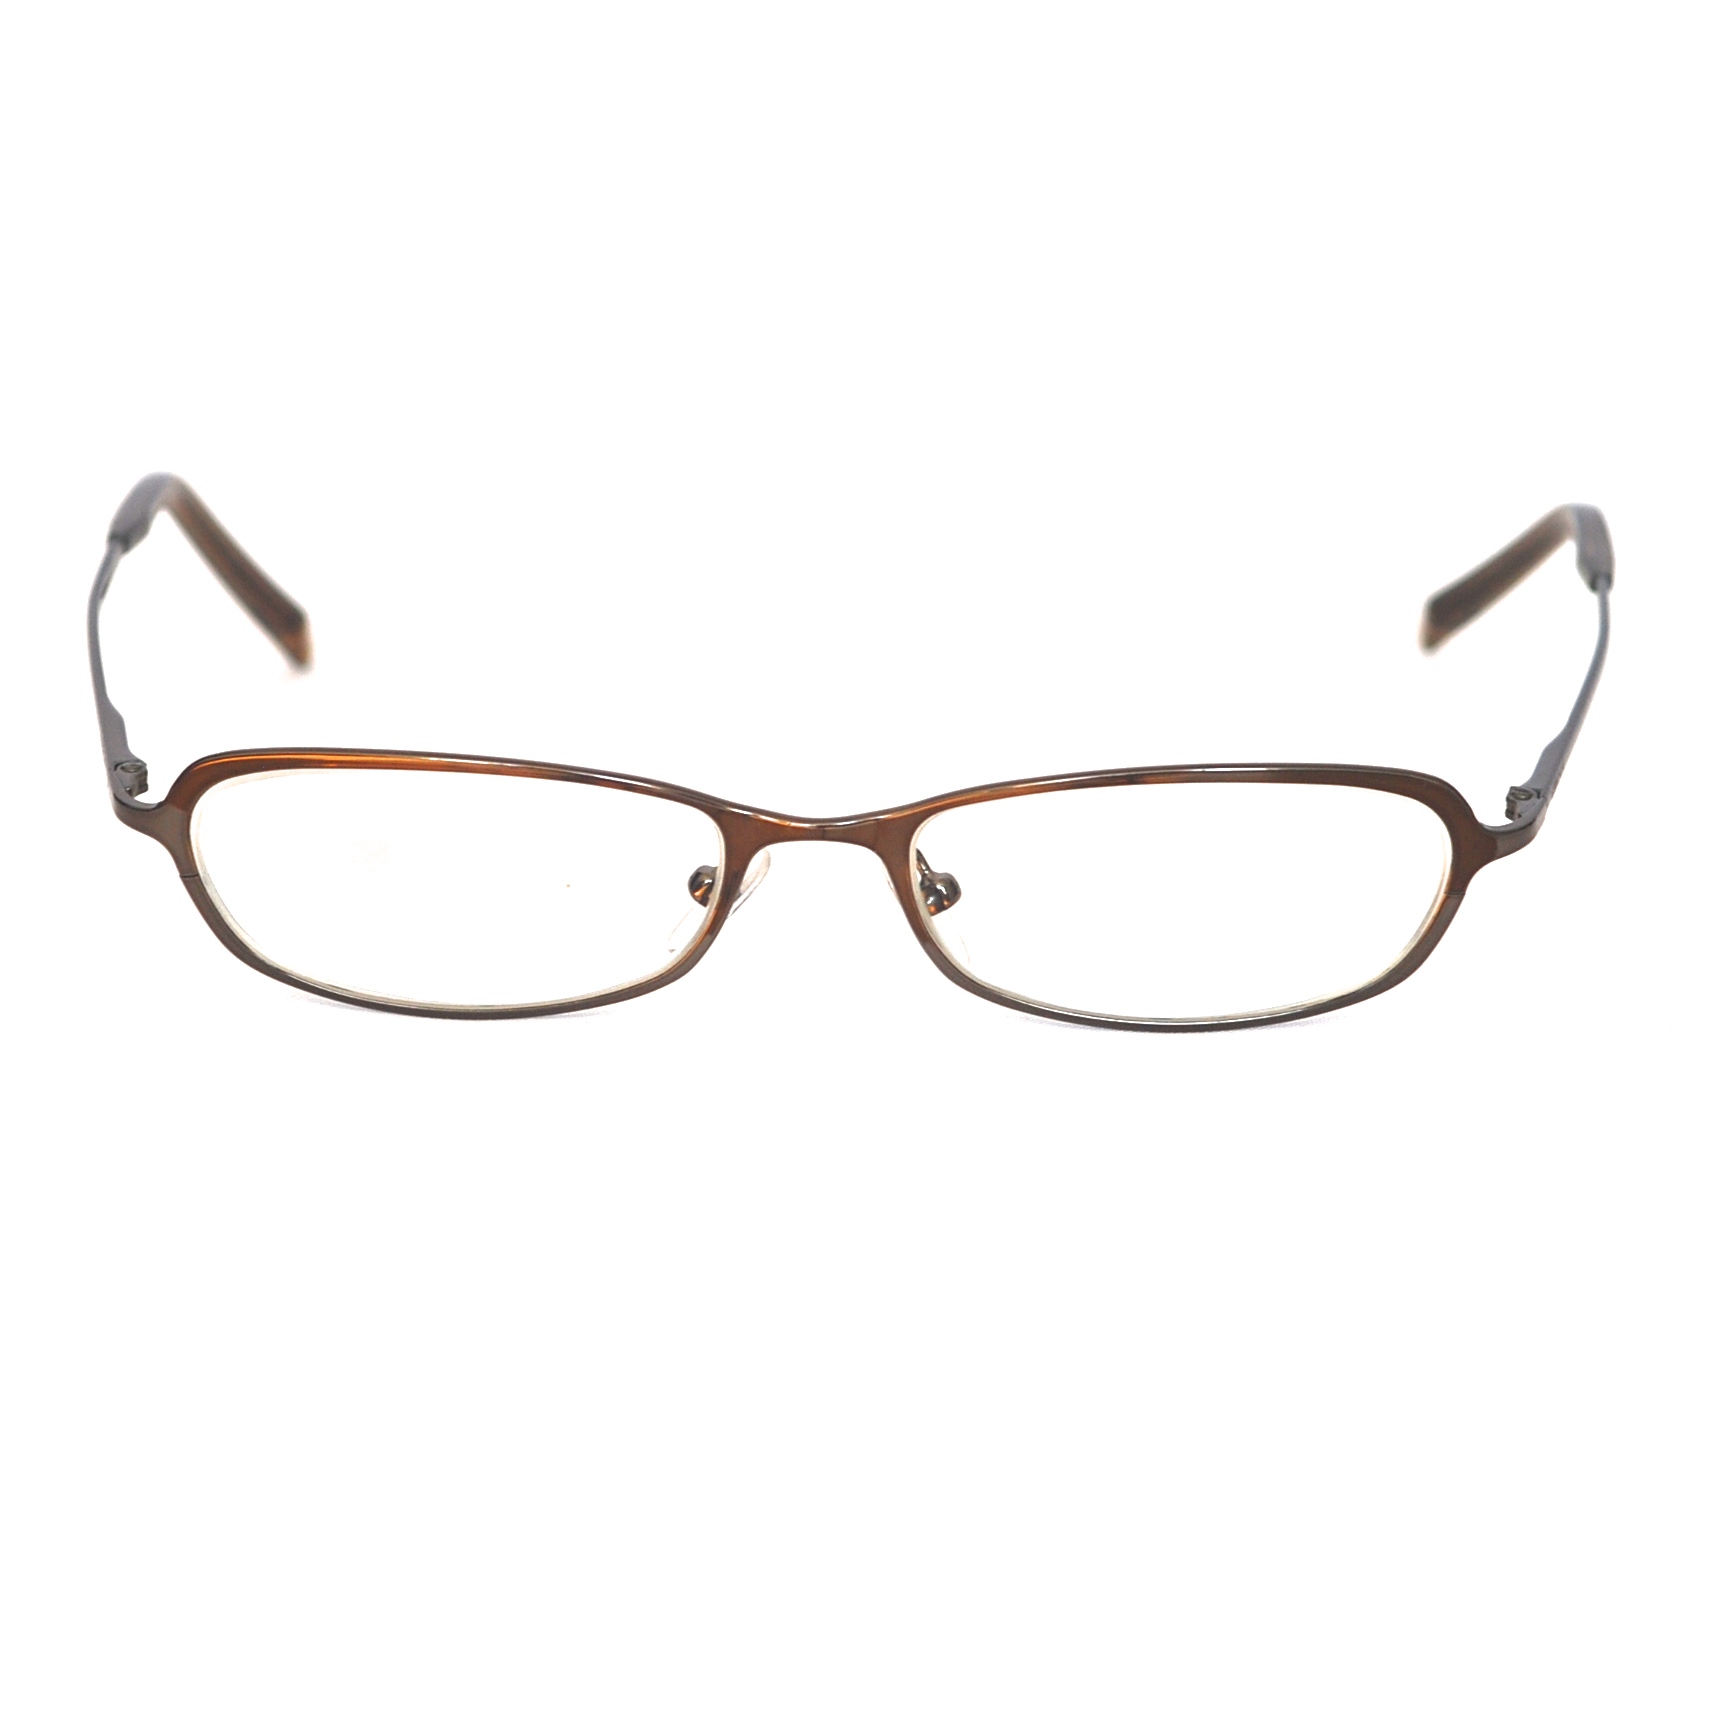 Gucci Eyeglass Frames In A Dark Metal With A Hint Of Bronze â Italy | QUIET WEST